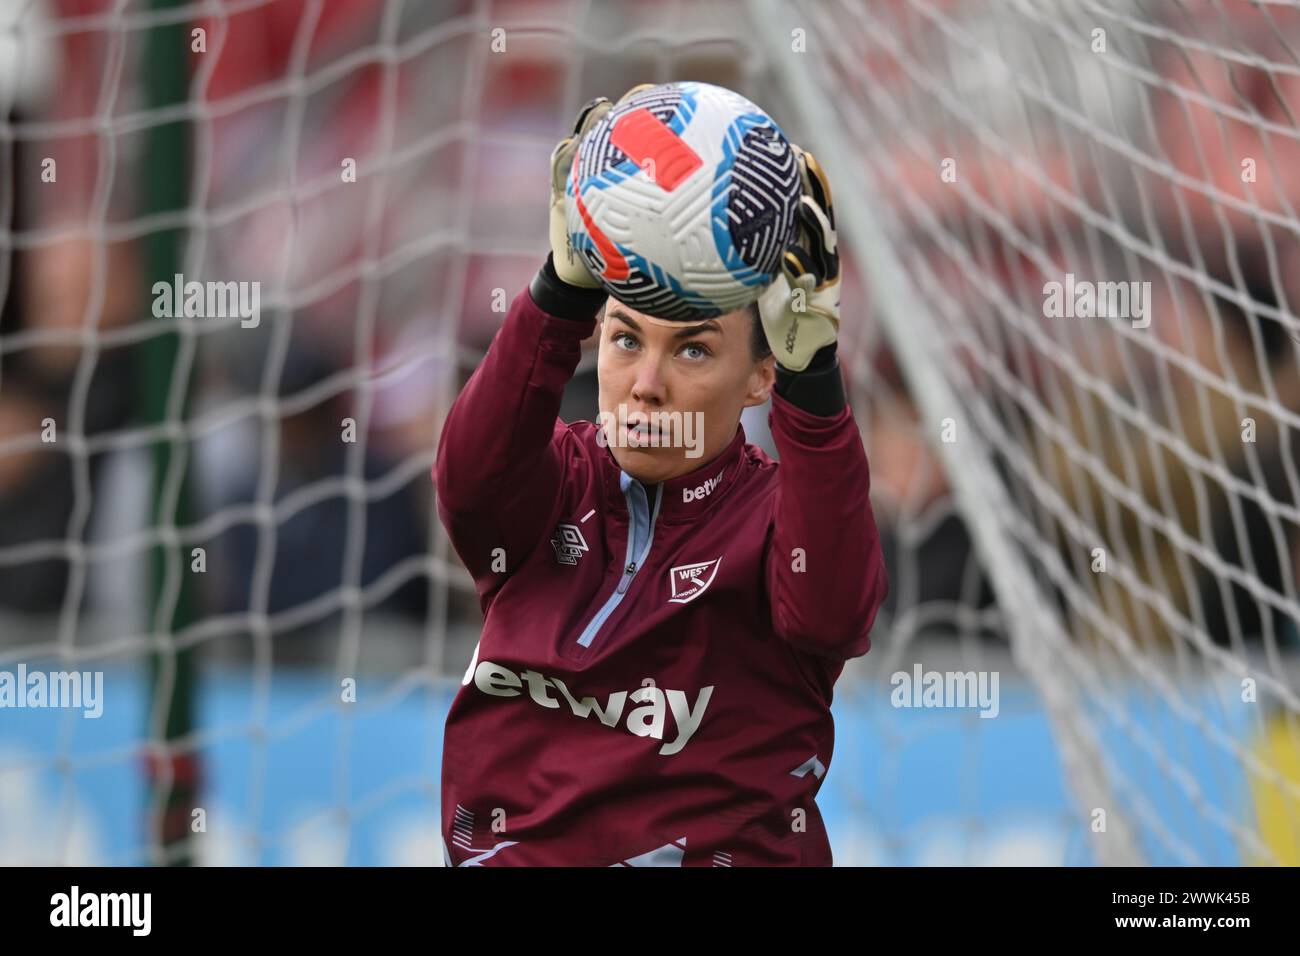 Dagenham on Sunday 24th March 2024. Goalkeeper Mackenzie Arnold (1 West Ham) warms up during the Barclays FA Women's Super League match between West Ham United and Chelsea at the Chigwell Construction Stadium, Dagenham on Sunday 24th March 2024. (Photo: Kevin Hodgson | MI News) Credit: MI News & Sport /Alamy Live News Stock Photo